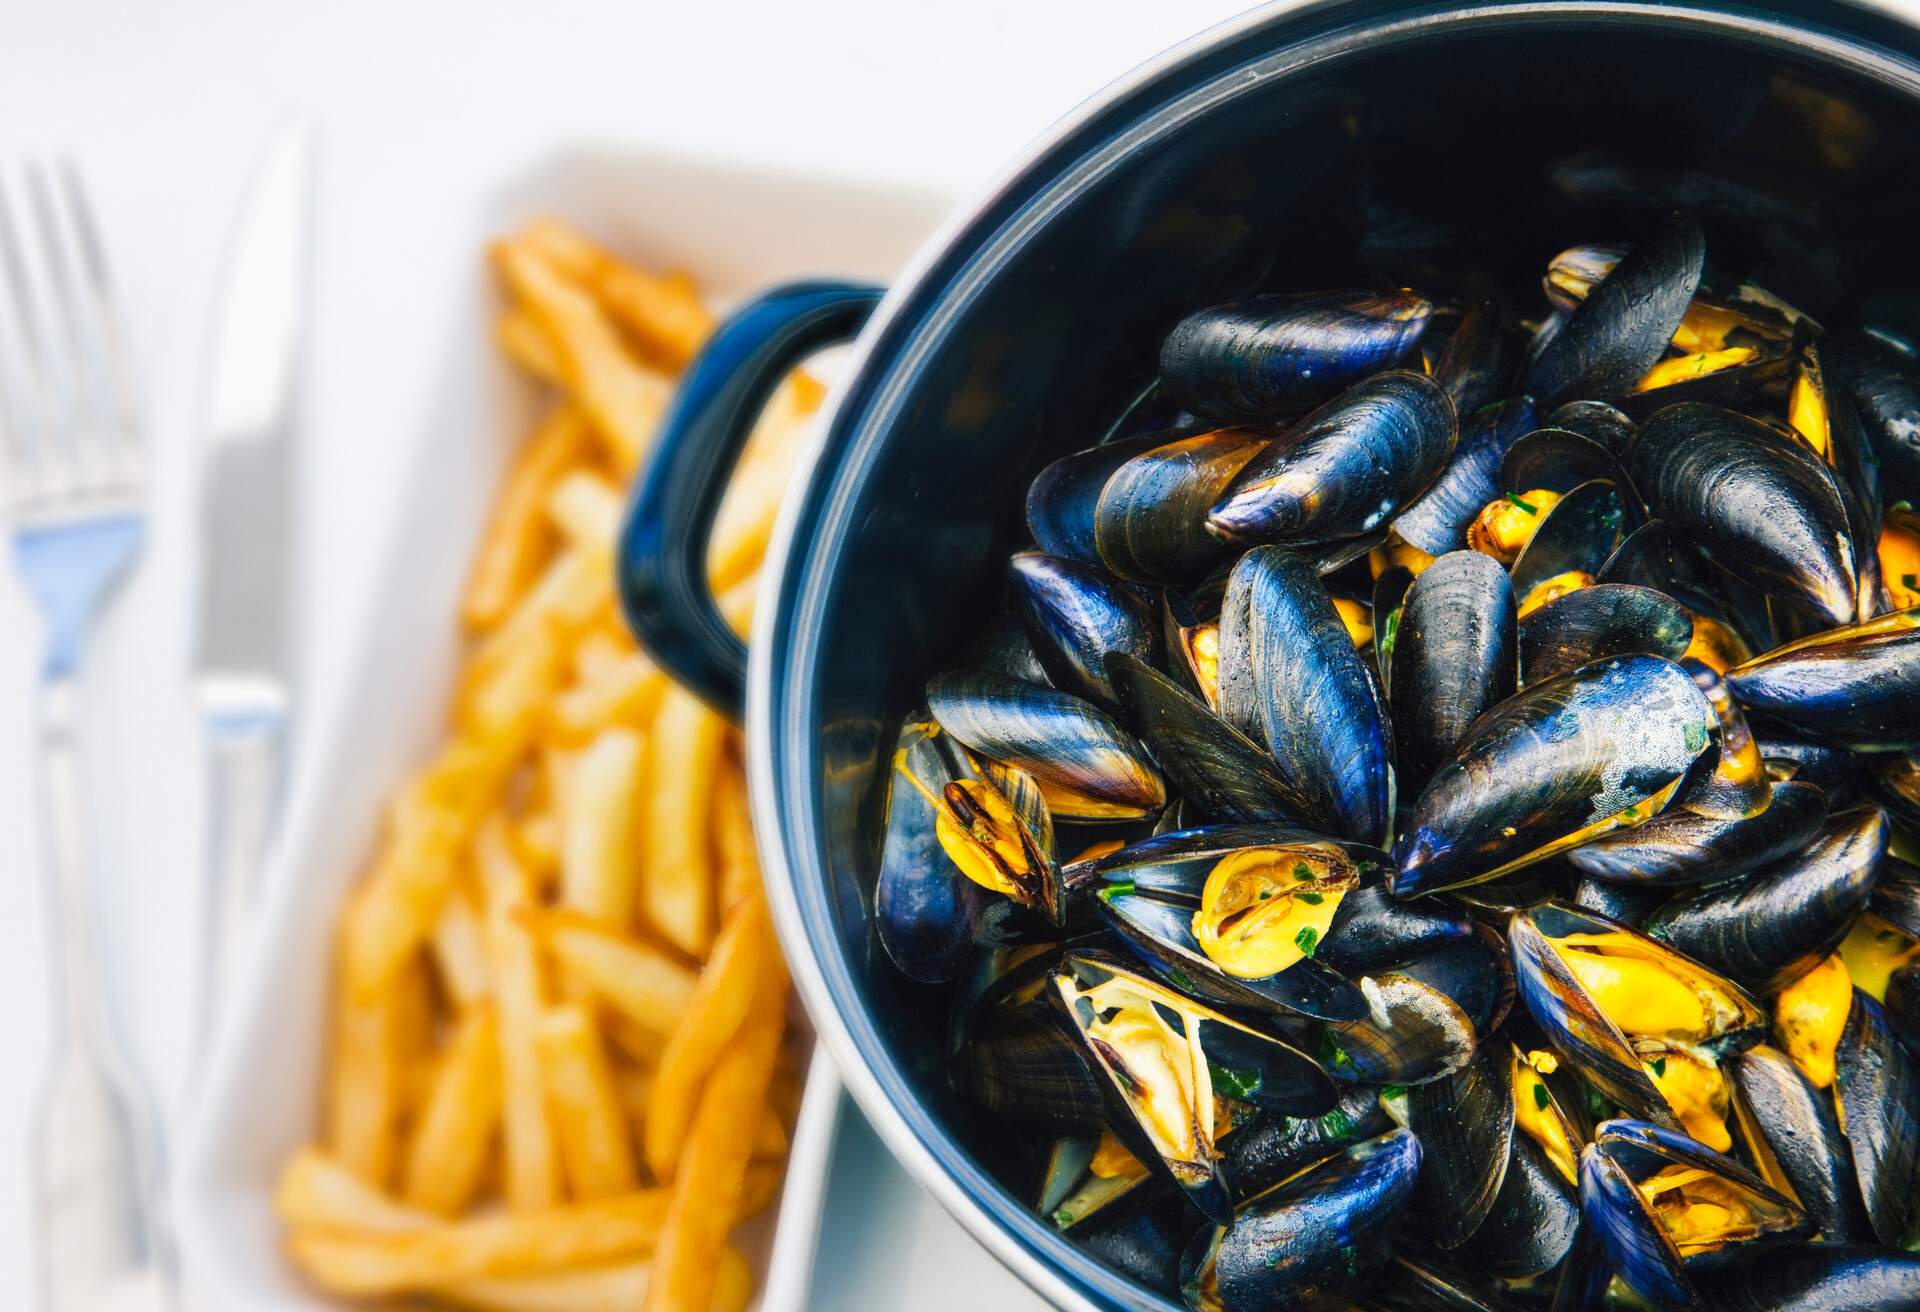 Moules et frite, a very popular French dish,